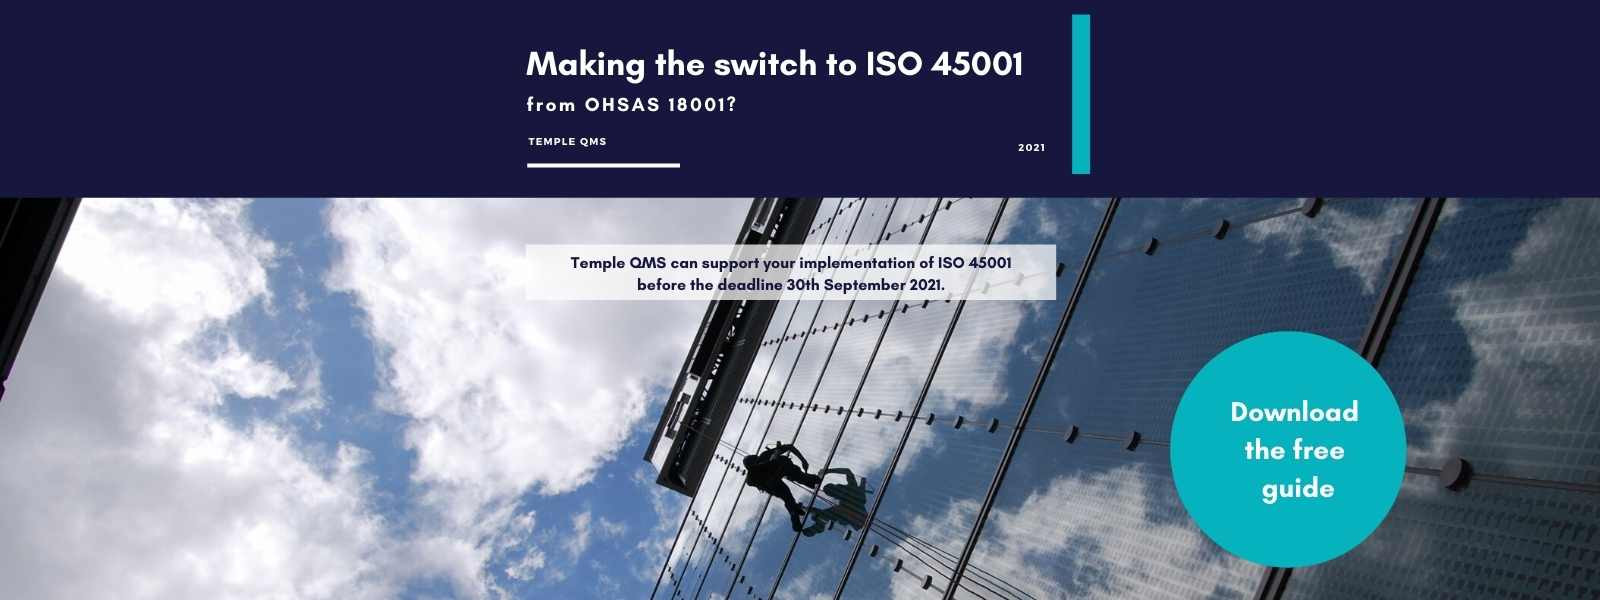 New guide launched by Temple for ISO 45001